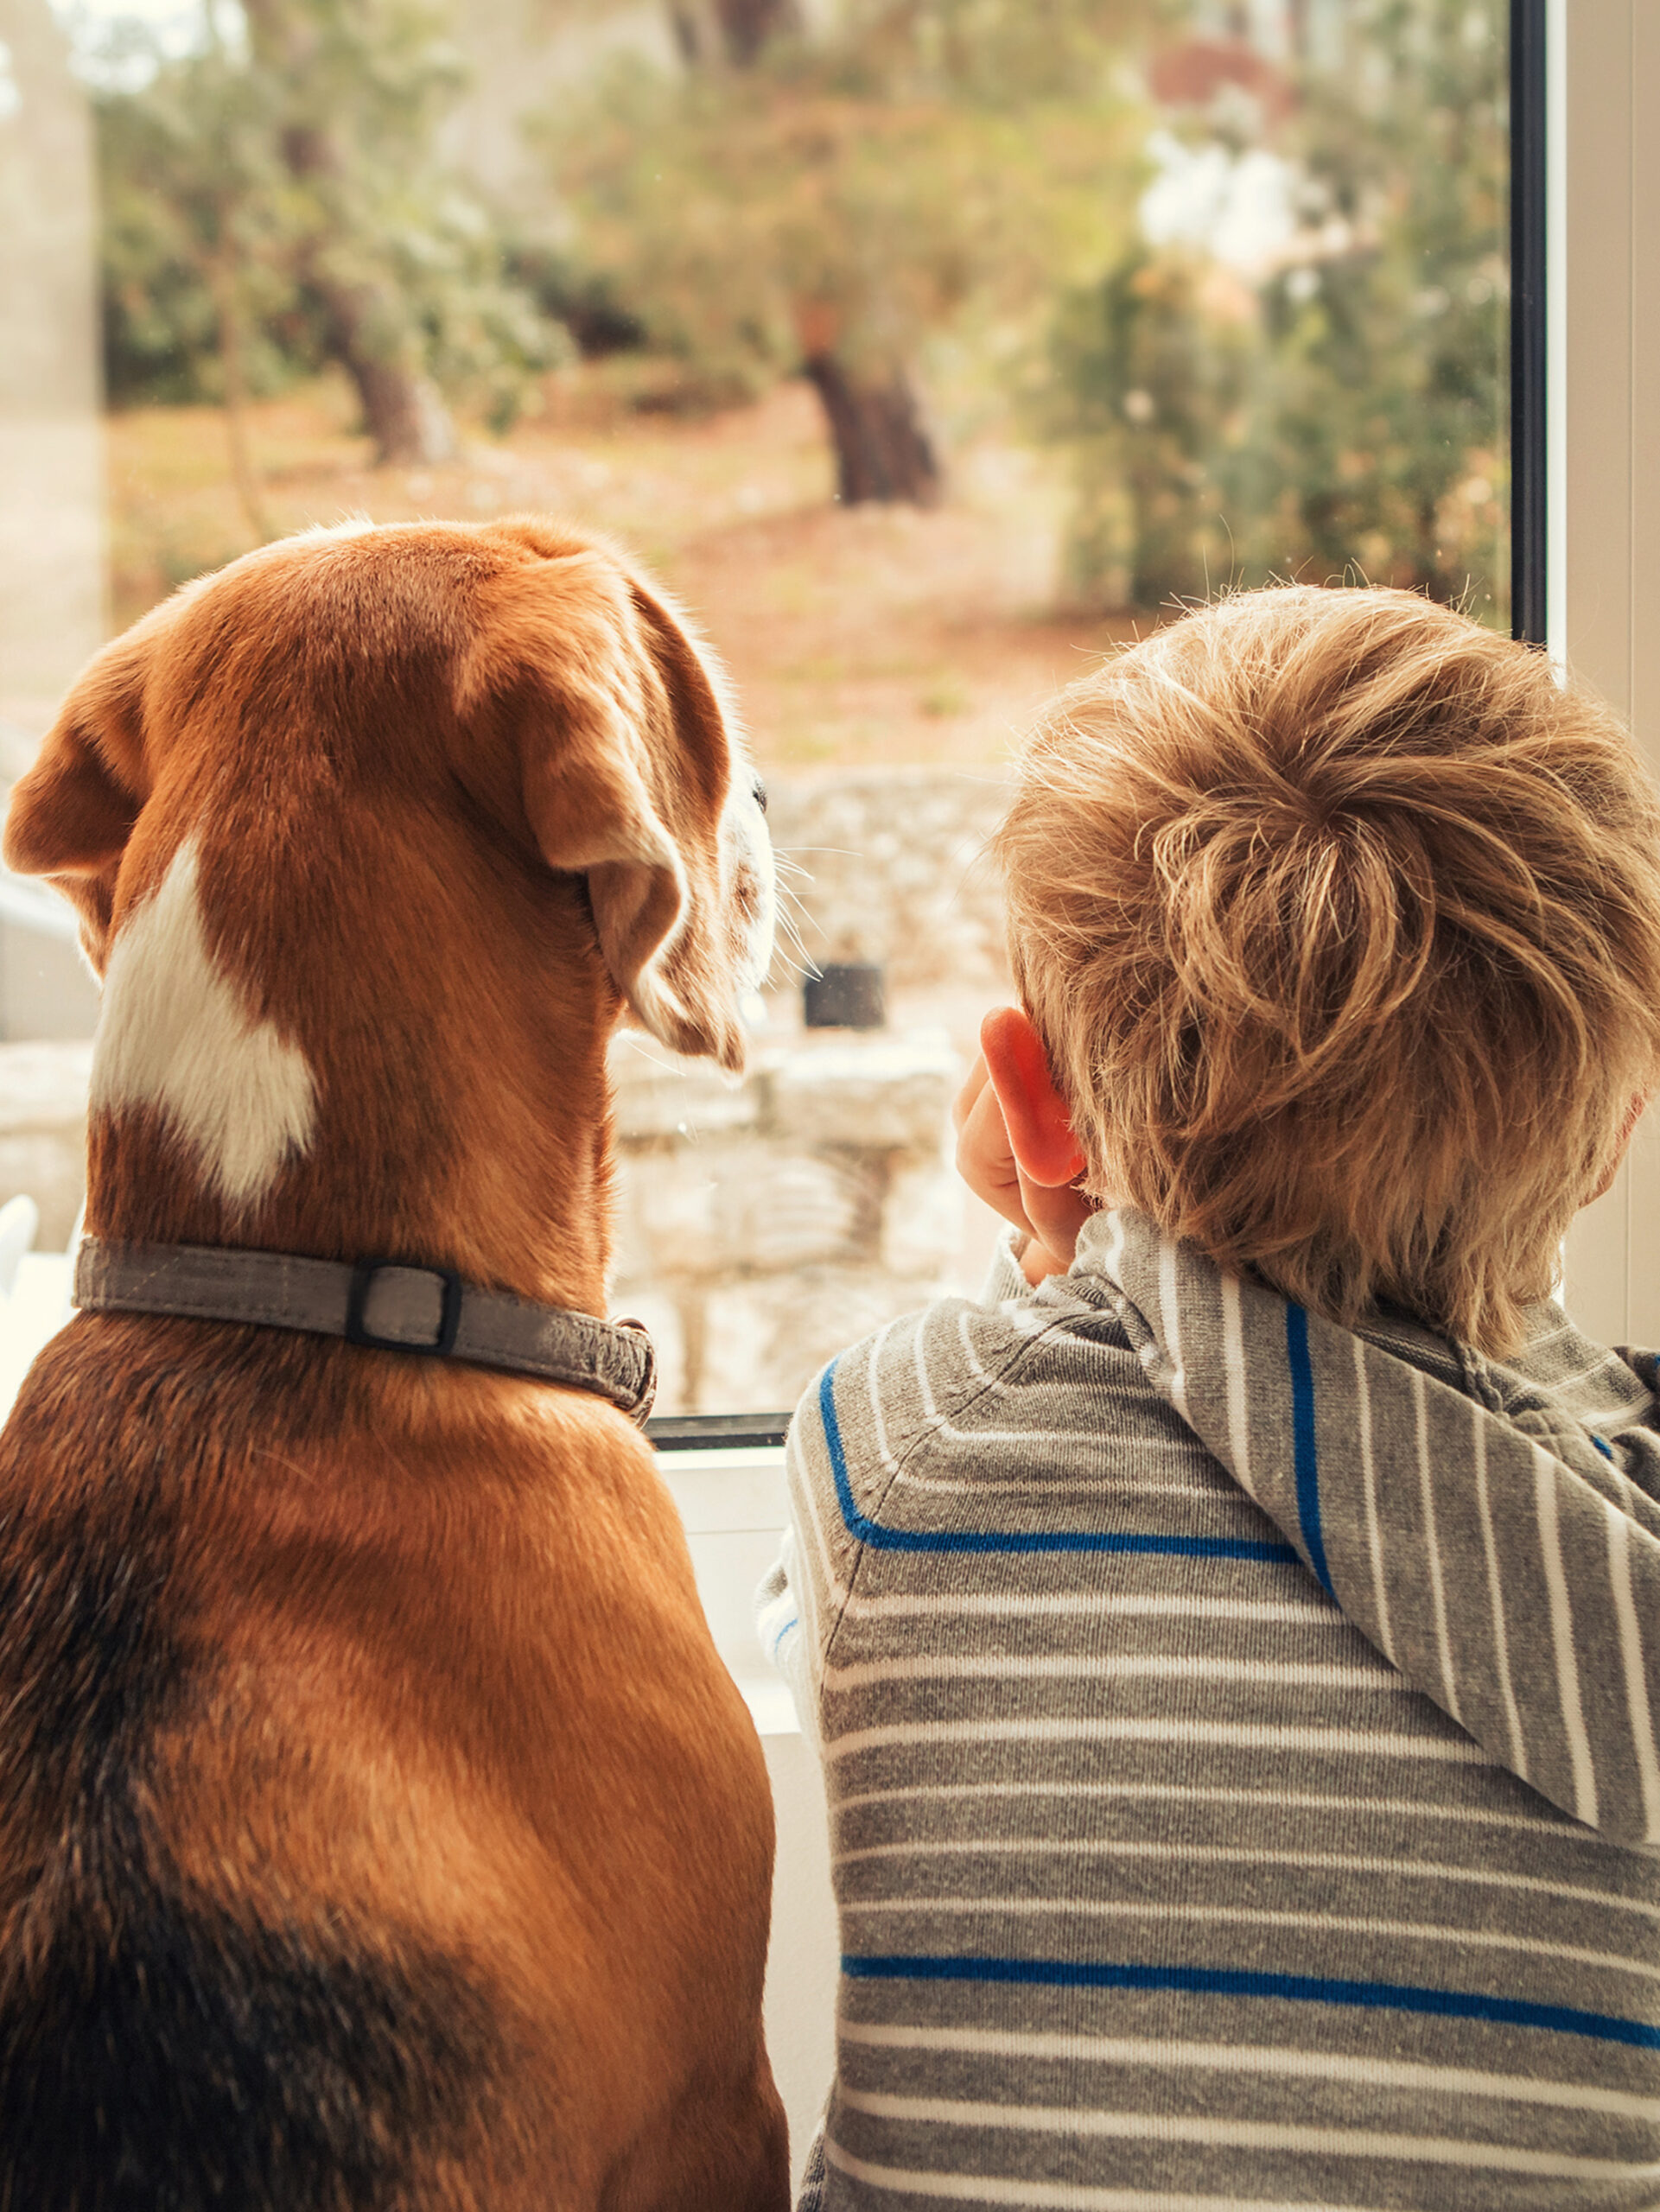 Child and dog look out the window - how to help your child grieve the loss of their pet. Advice from CHOC